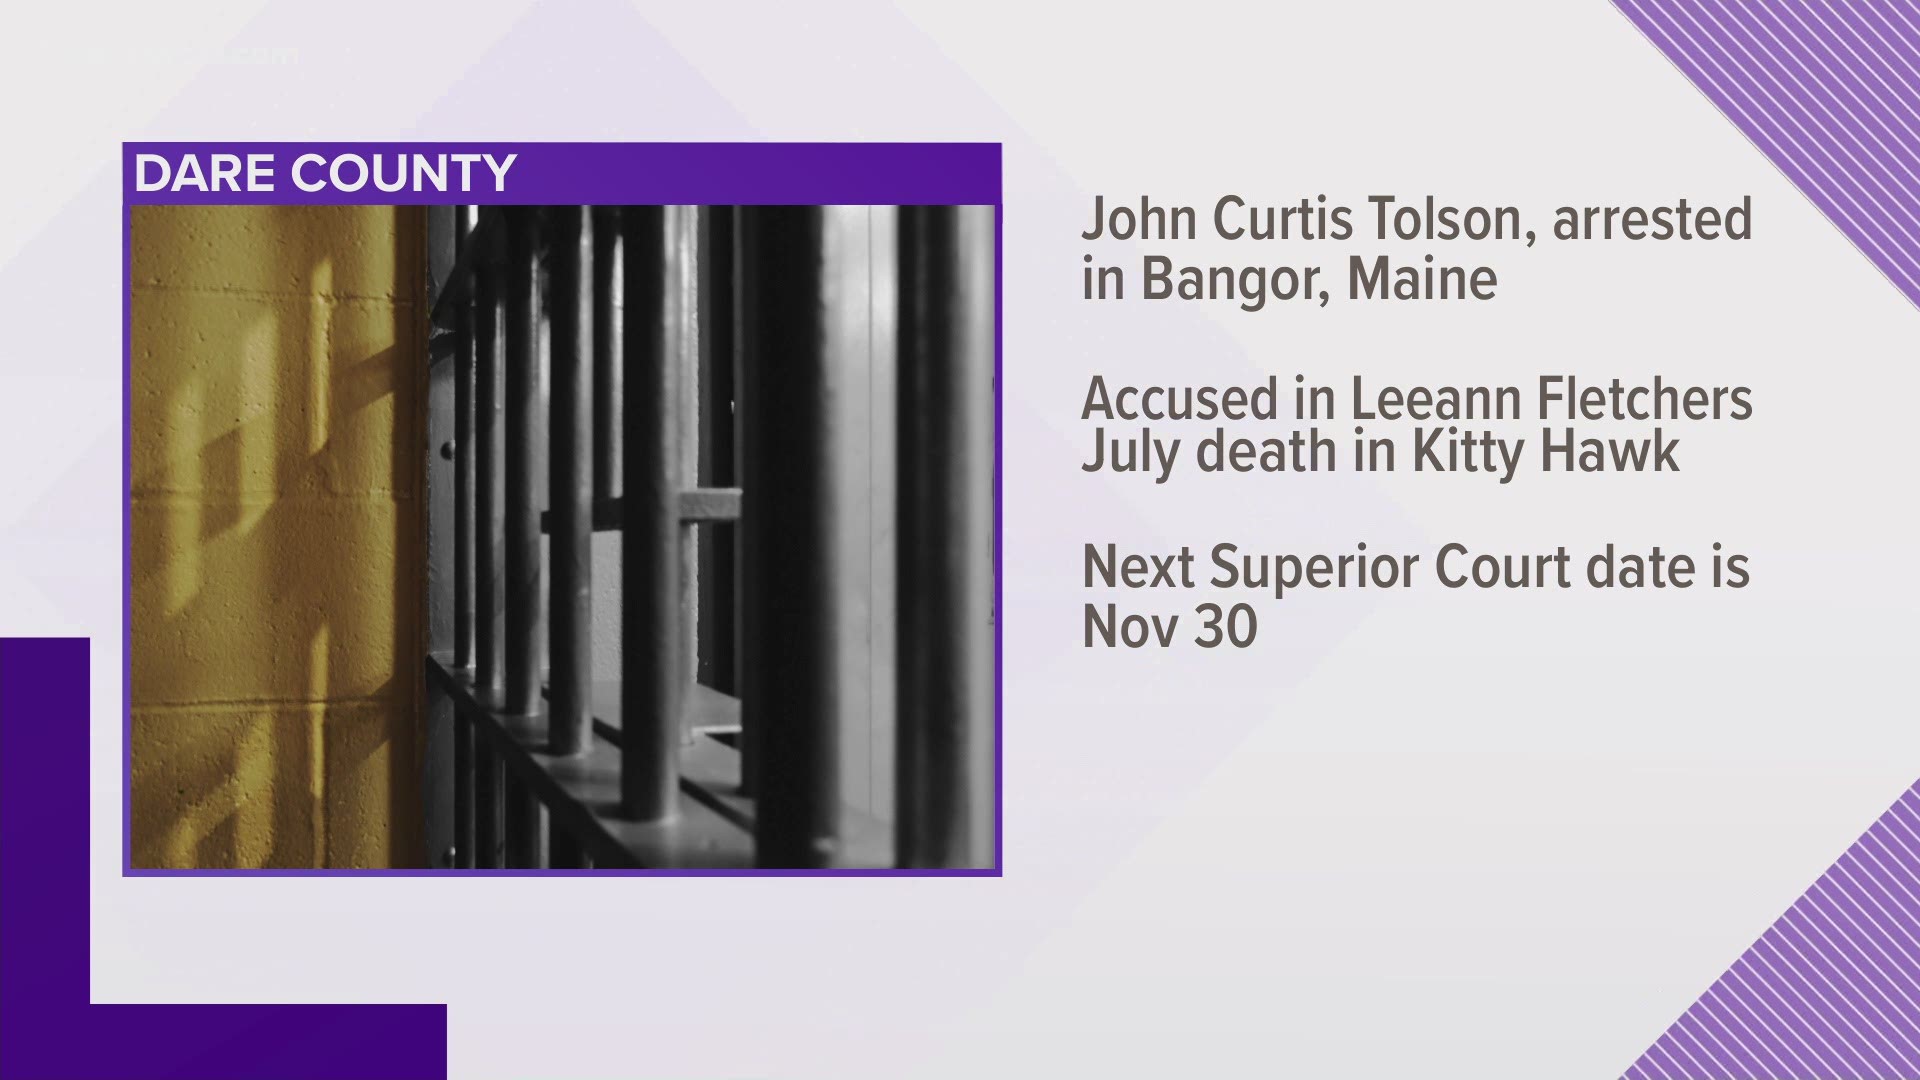 John Curtis Tolson was arrested in Maine and charged with the murder of a woman in Kitty Hawk.